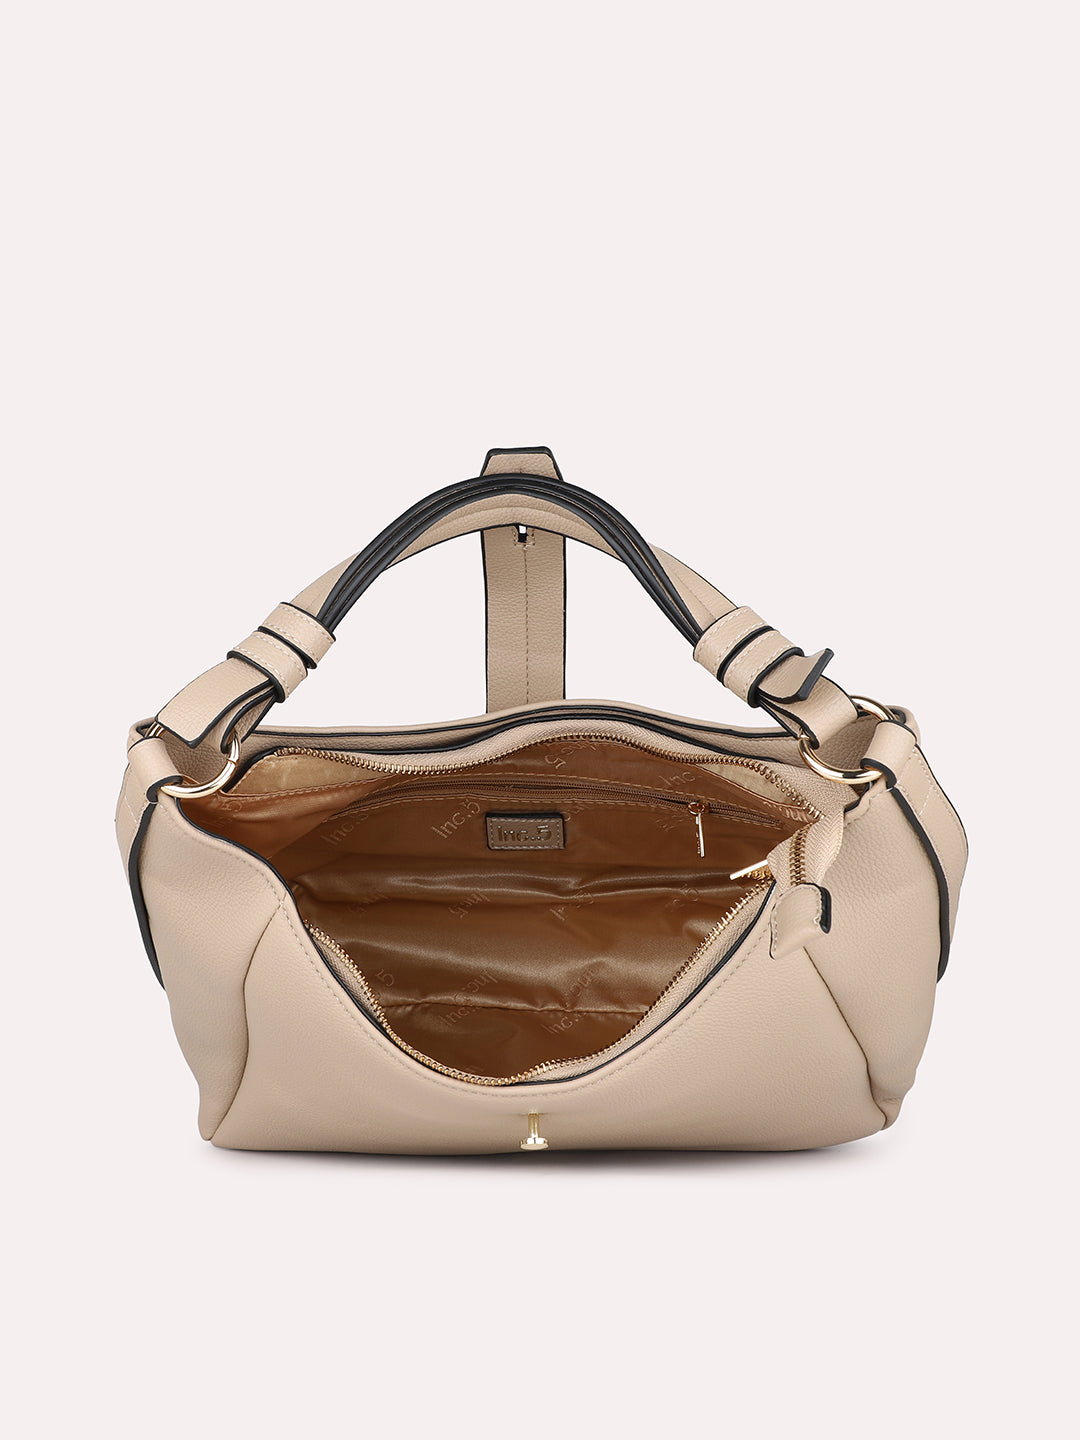 Women Beige Textured PU Hobo Bag With Button Detail